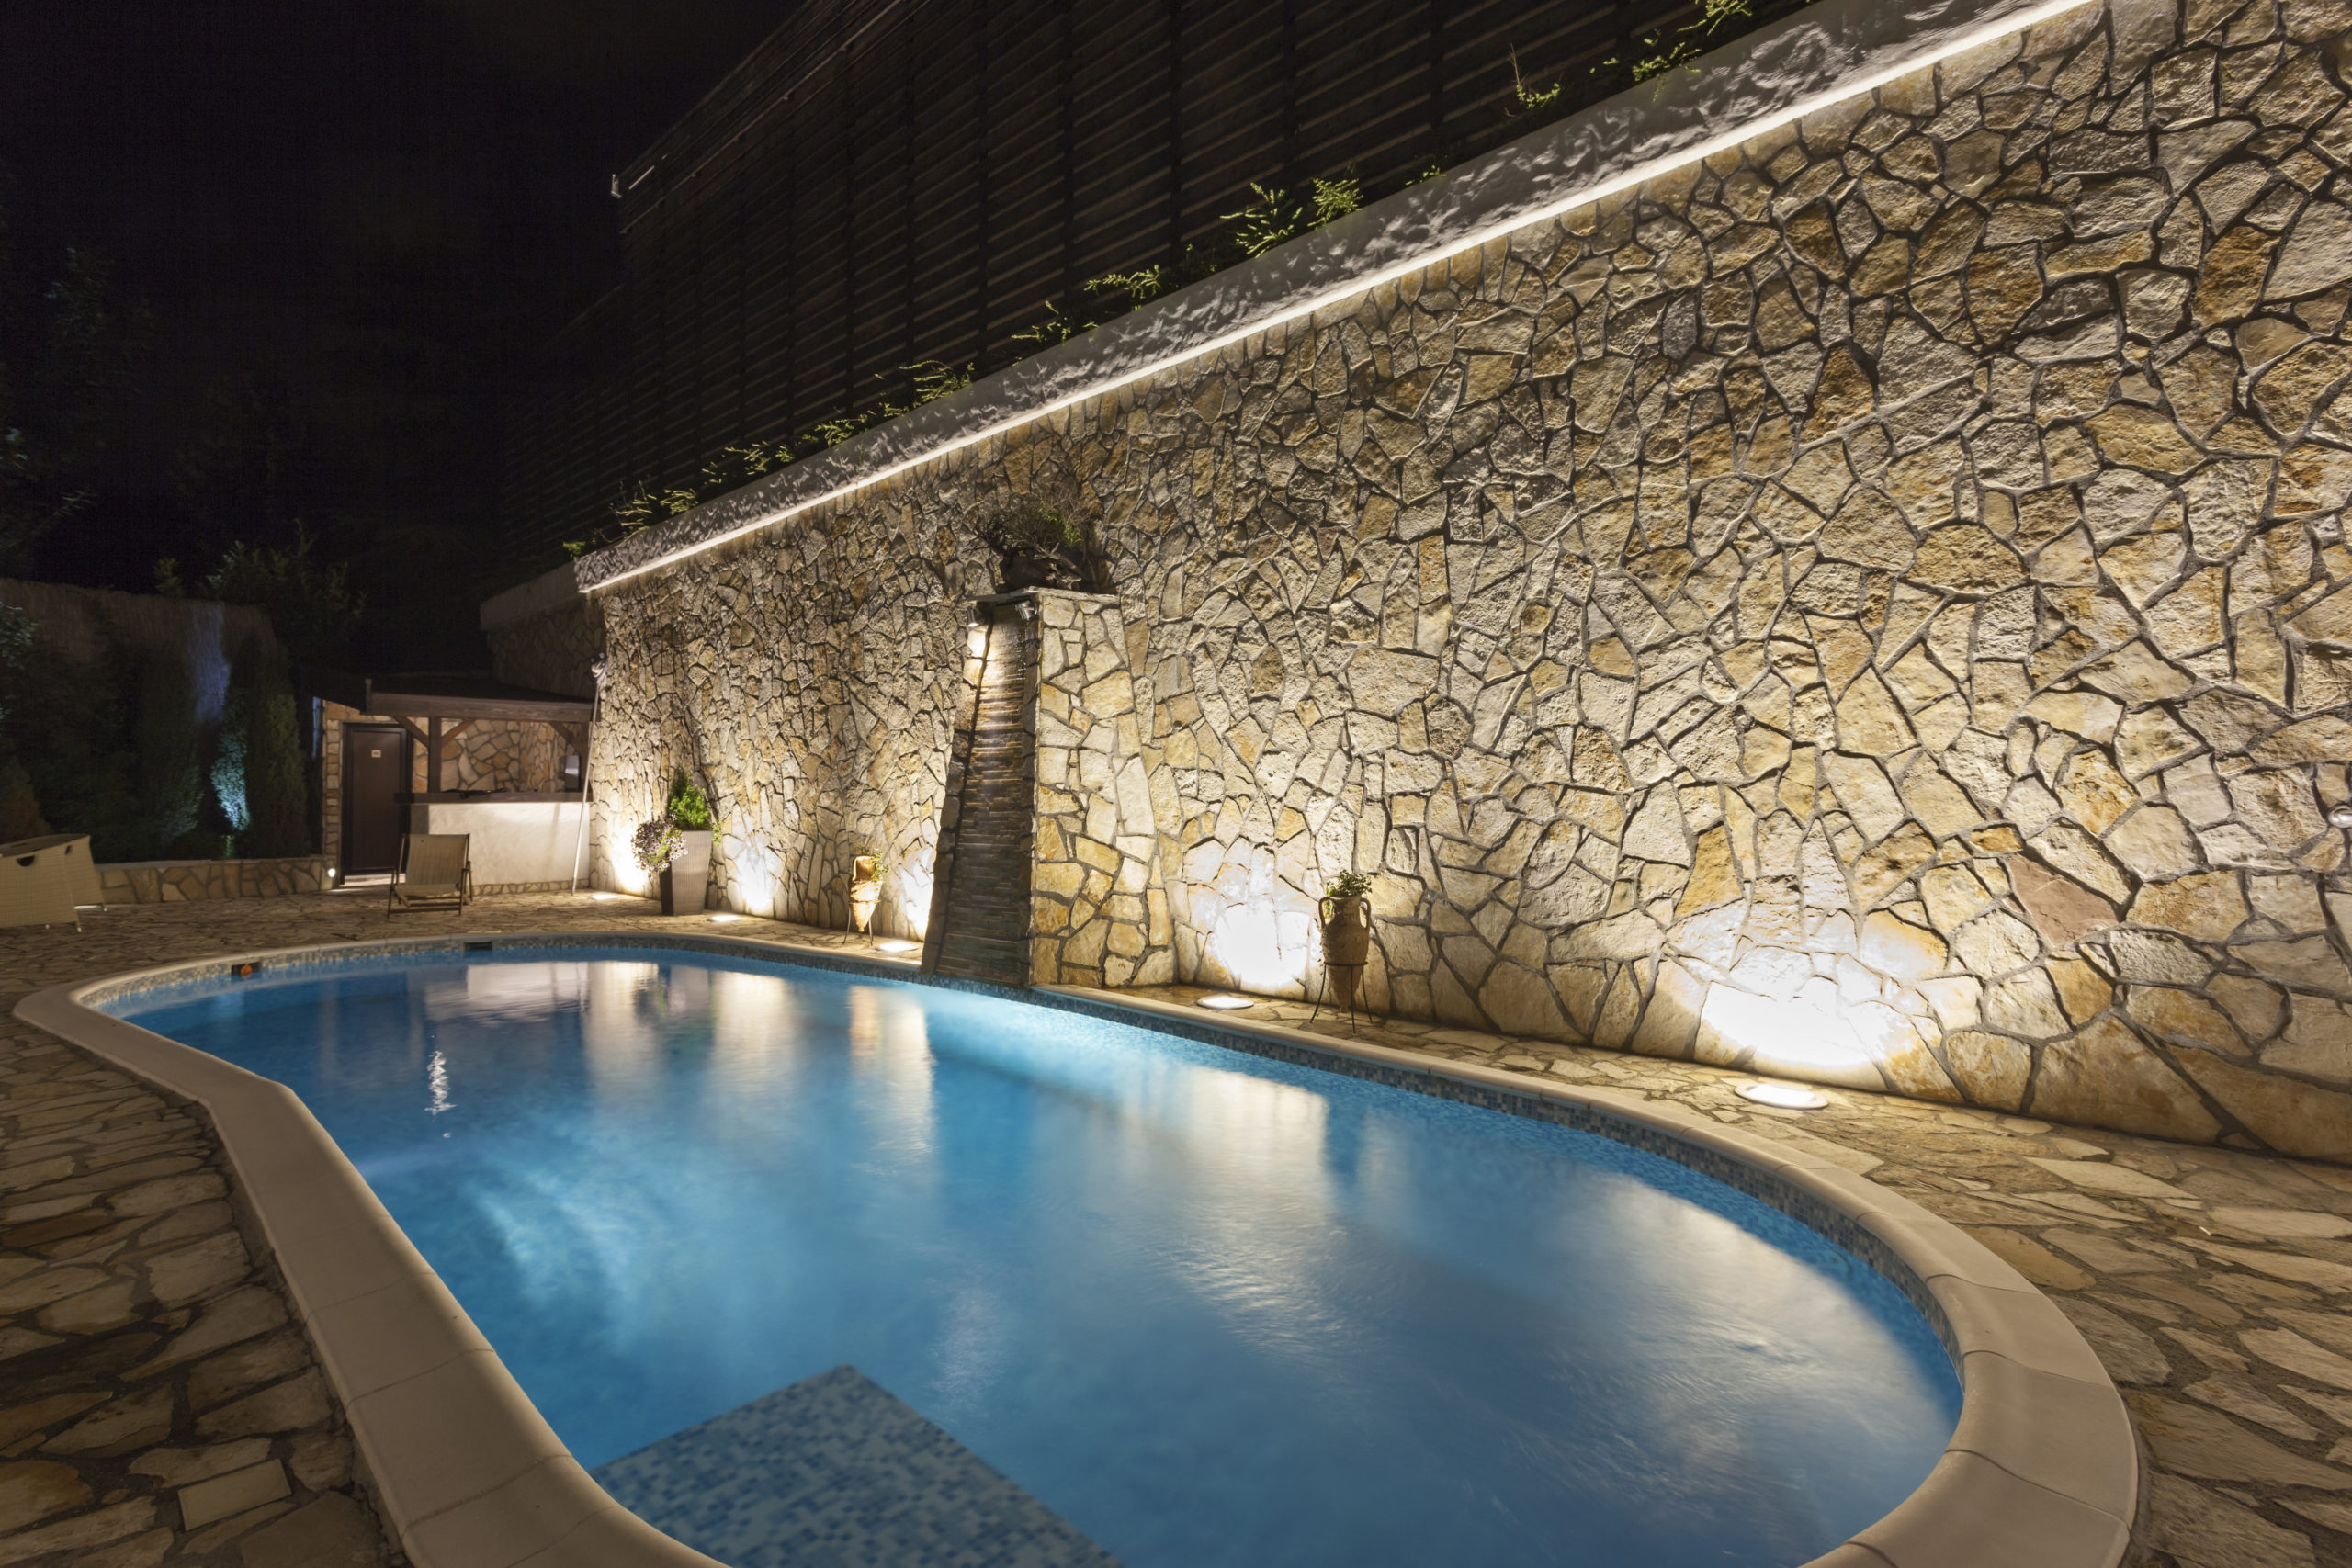 A nighttime swimming pool illuminated with vibrant lights, creating a captivating and colorful ambiance